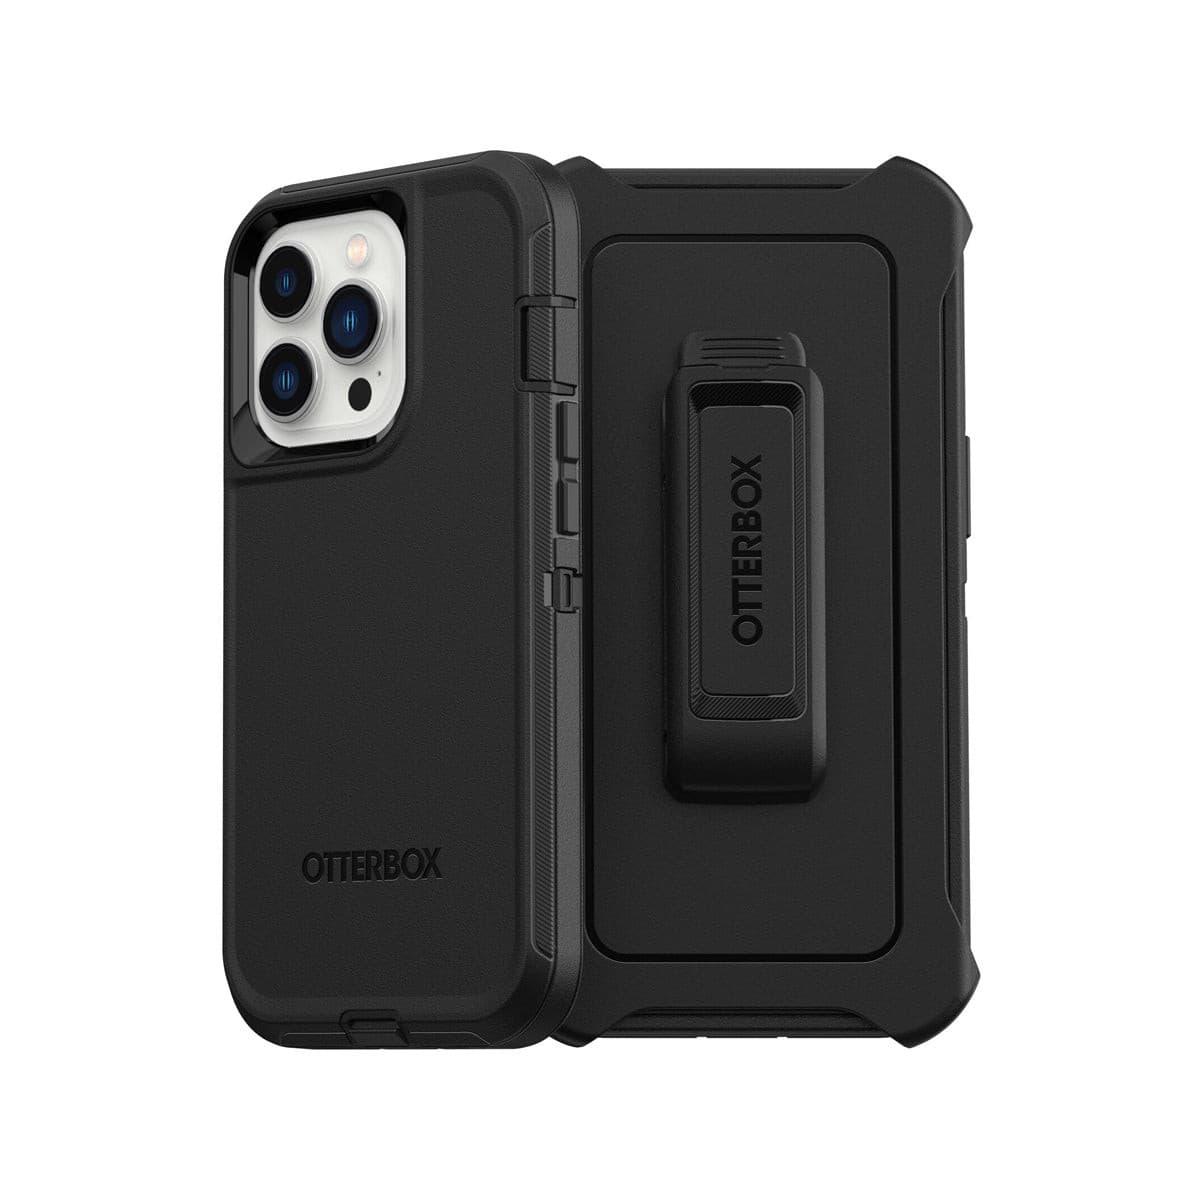 Otterbox Defender Phone Case for iPhone 13 Pro.